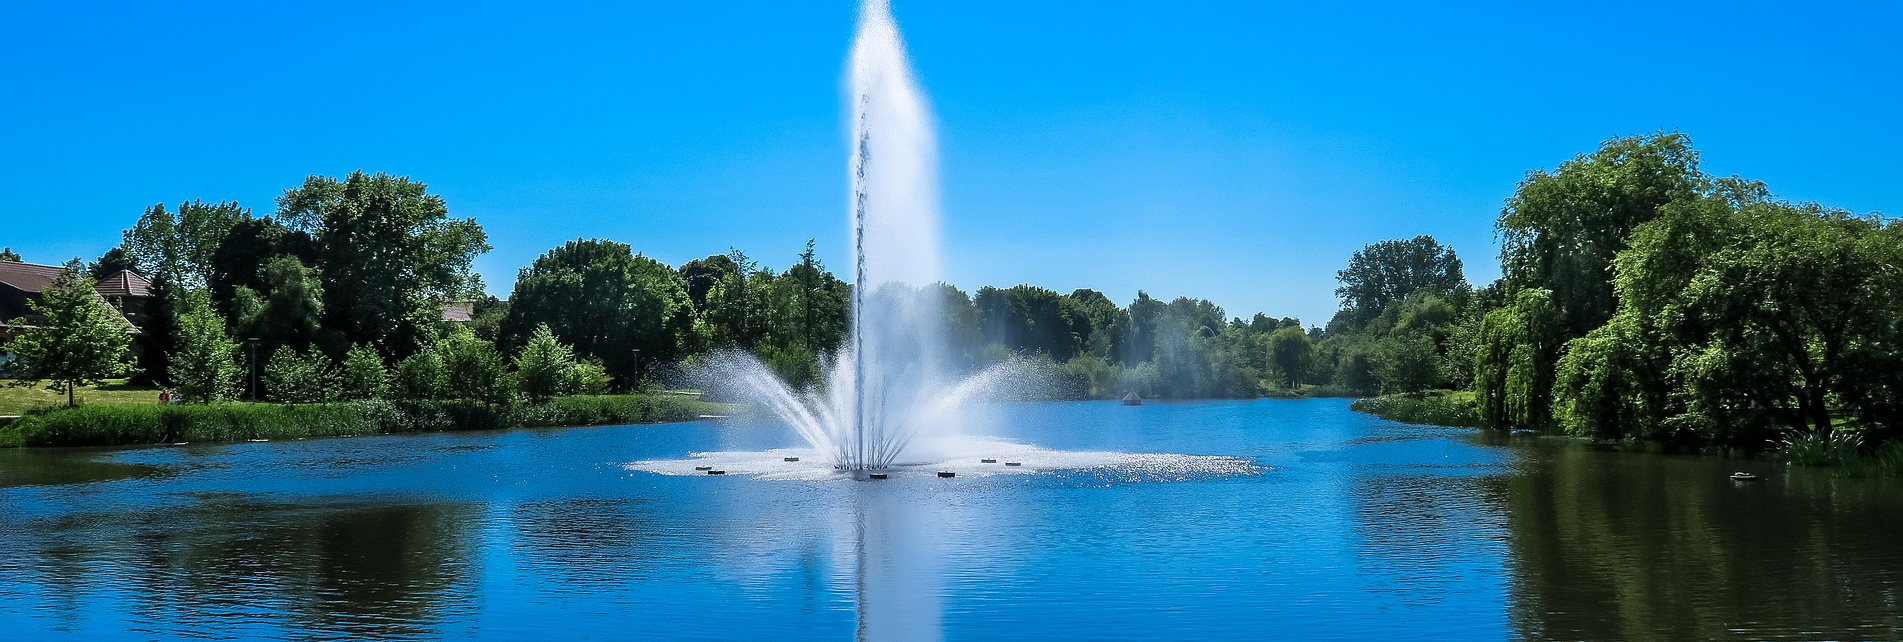 The Lake Doctor - lake management floating fountains Dallas Fort Worth Texas - Lake Management Company - Floating Fountains Aeration Systems Vegetation Control Fish Fish Feeders Installation & Design Frisco Texas